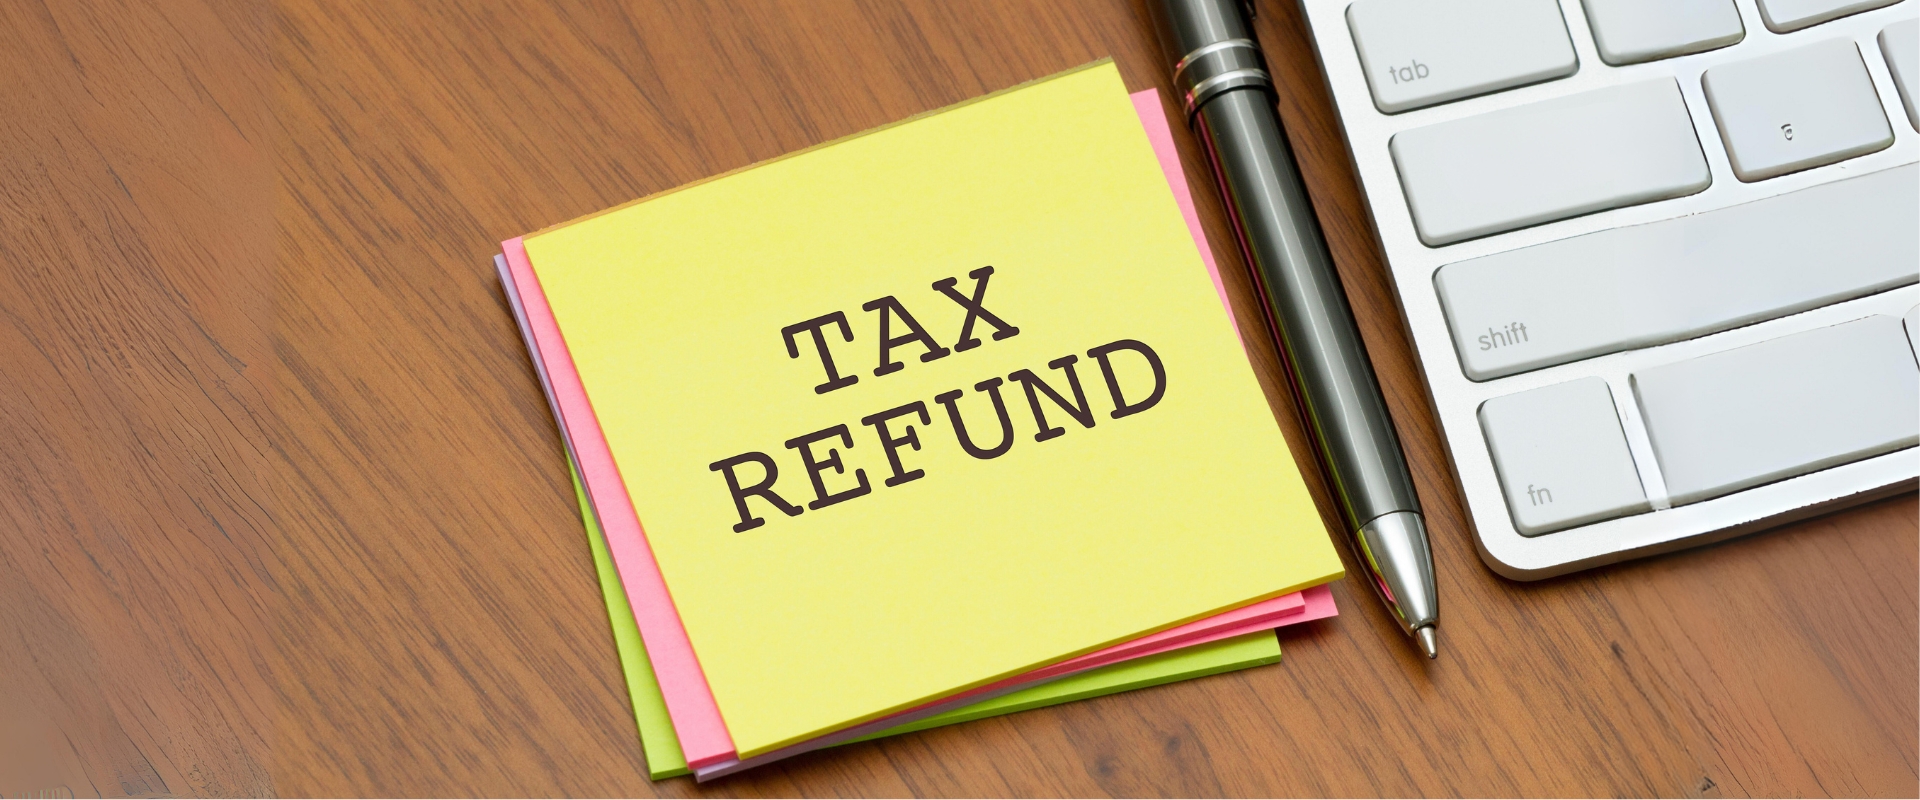 Optimize Tax Refunds by Taking Advantage of the Latest Rules